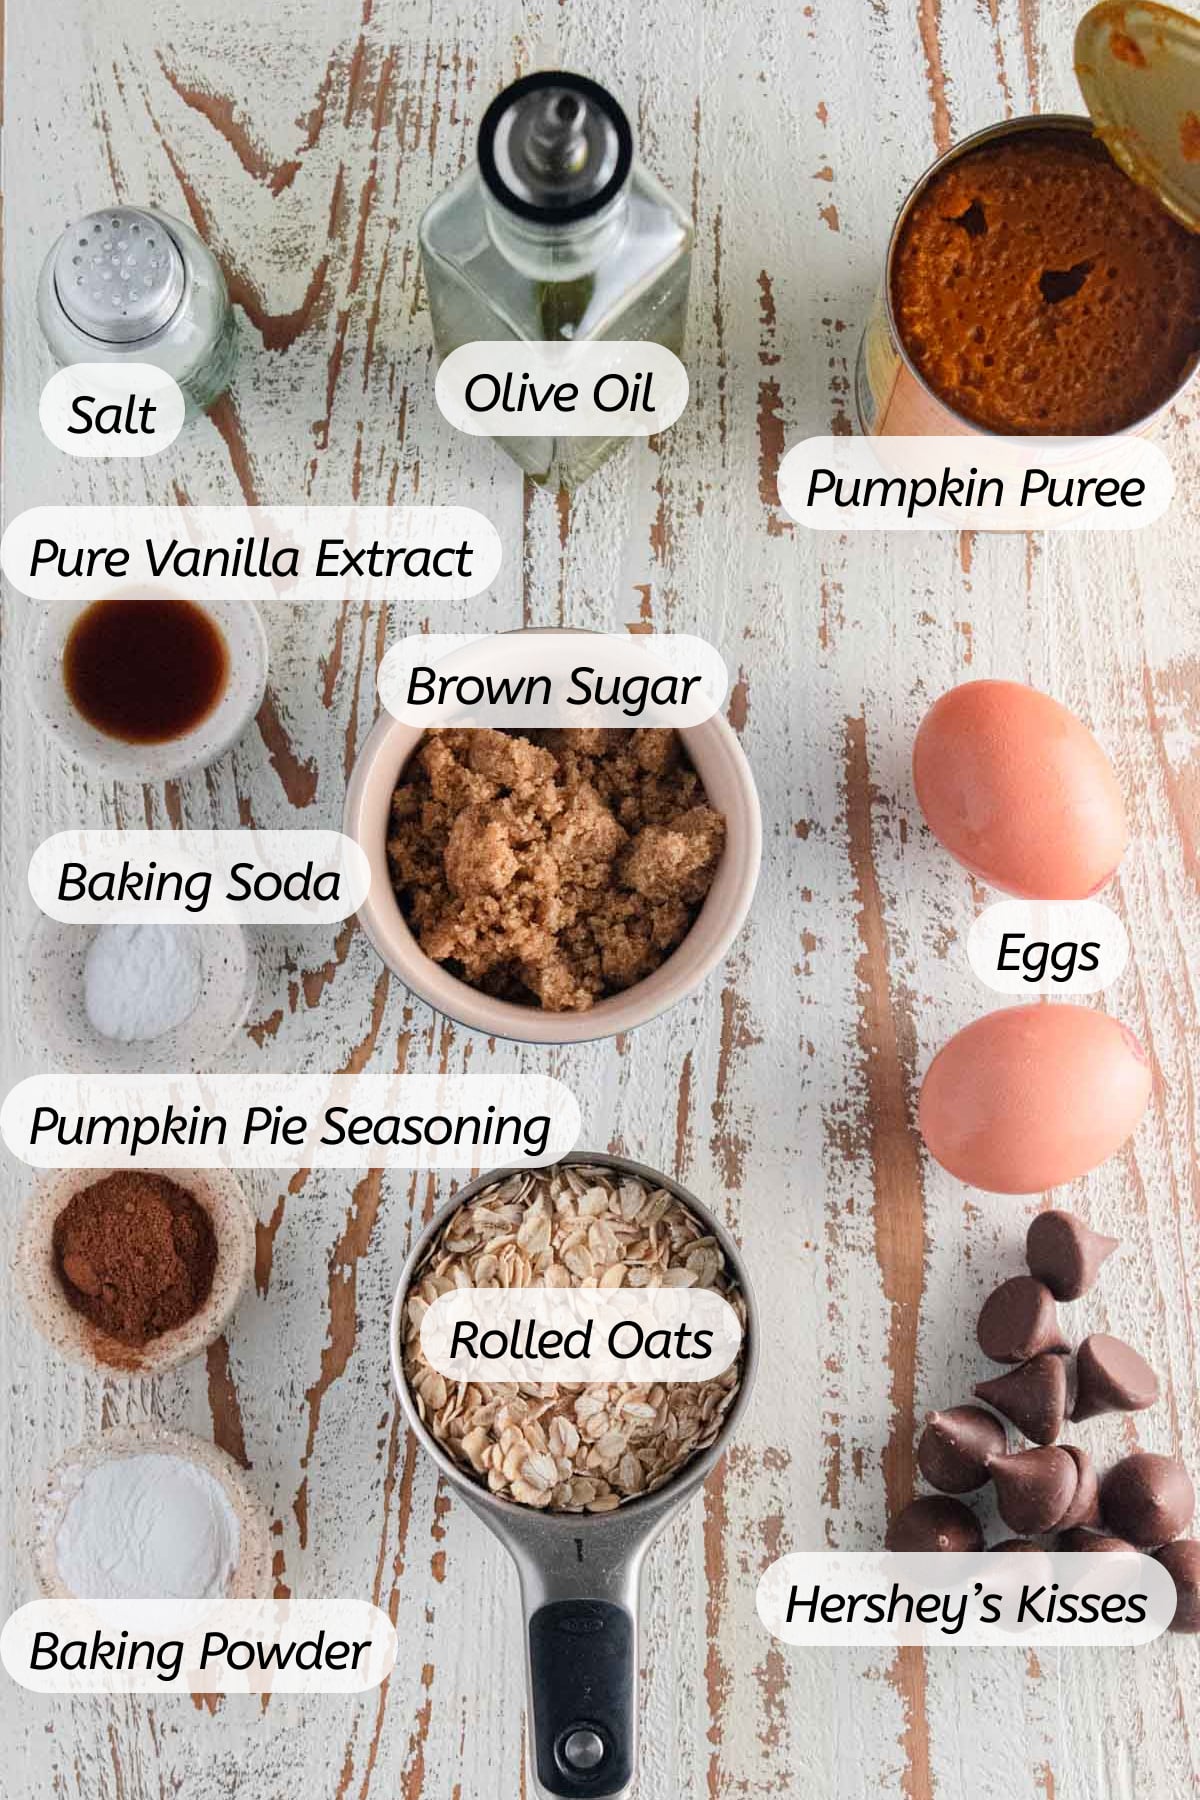 A picture of the ingredients you will need to make these muffins with labels included.